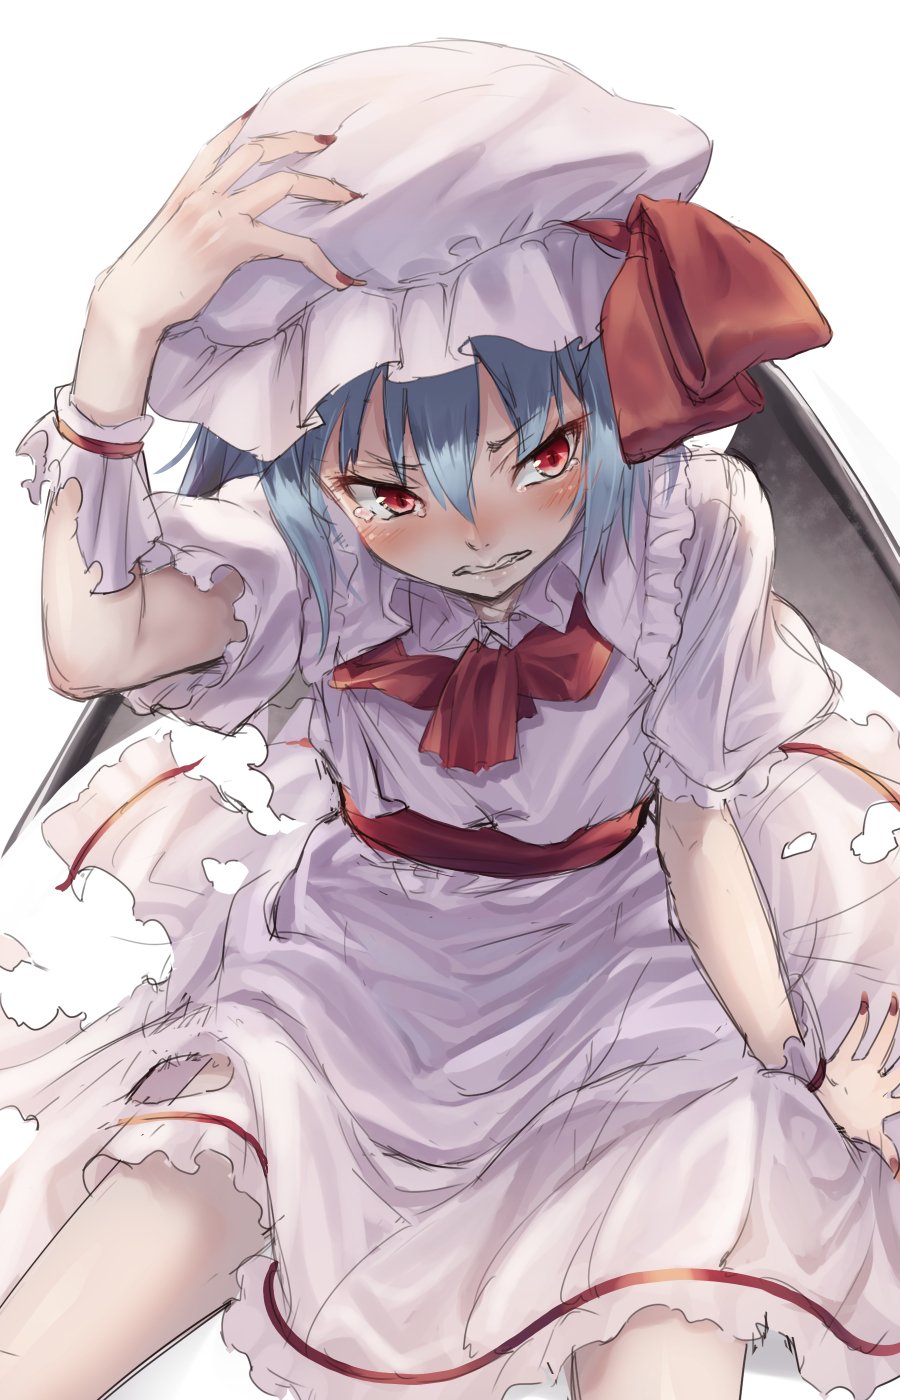 1girl arm_up bangs bat_wings blue_hair blush clenched_teeth commentary_request cowboy_shot dress eyebrows_visible_through_hair frilled_shirt_collar frills hair_between_eyes hand_on_headwear hat hat_ribbon highres looking_at_viewer mob_cap nail_polish puffy_short_sleeves puffy_sleeves red_eyes red_nails red_neckwear red_ribbon red_sash remilia_scarlet ribbon sash short_hair short_sleeves simple_background sitting solo tears teeth thighs torn_clothes torn_dress touhou usotsuki_penta v-shaped_eyebrows white_background white_dress white_hat wings wrist_cuffs